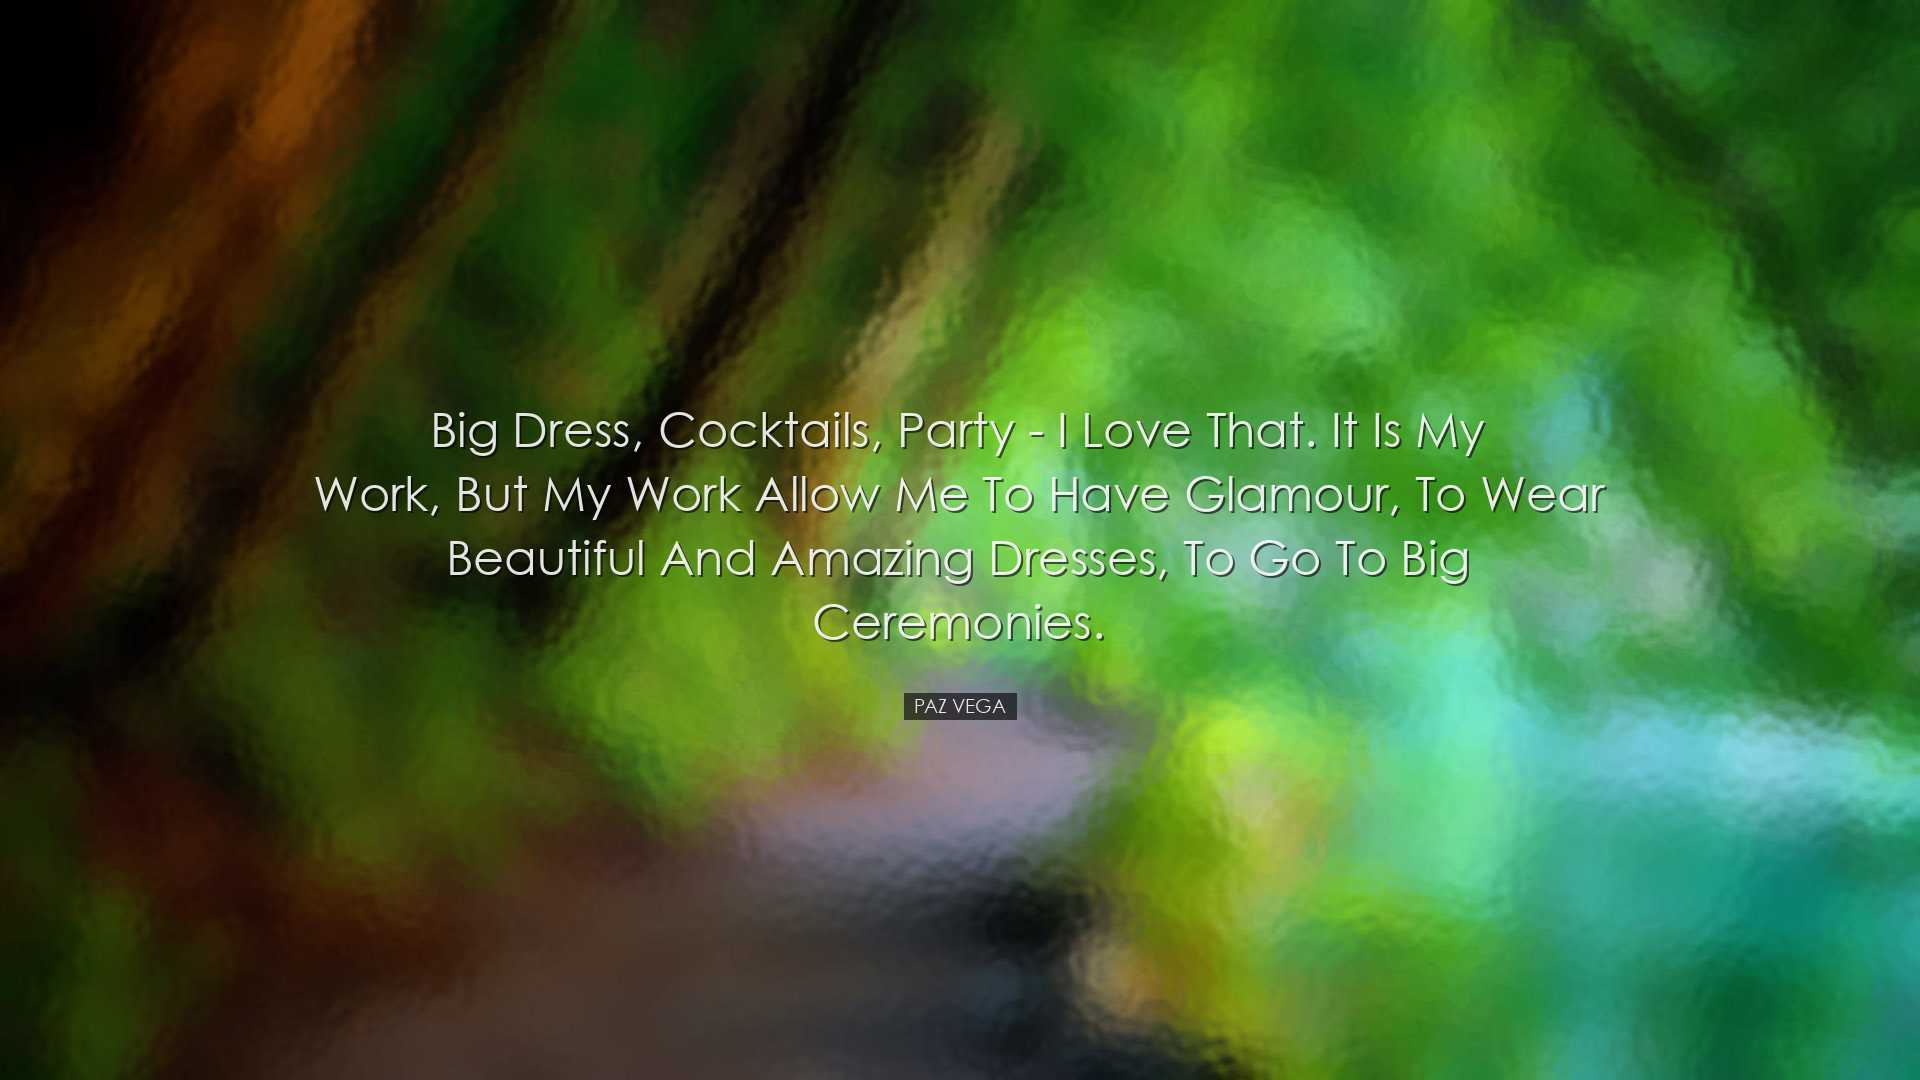 Big dress, cocktails, party - I love that. It is my work, but my w